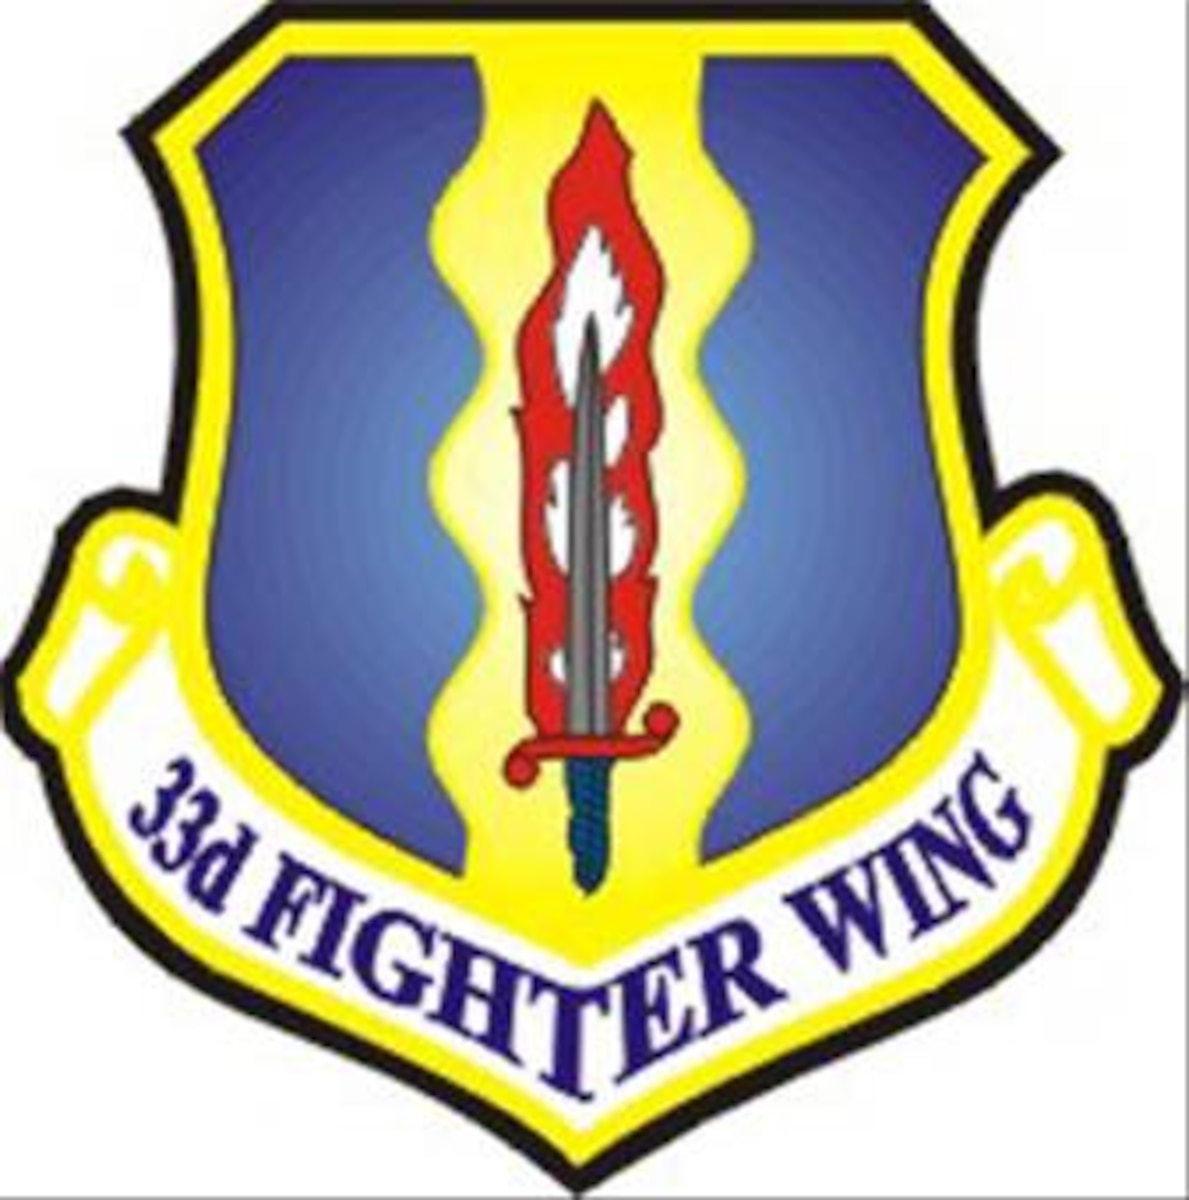 Official 33rd Fighter Wing shield.